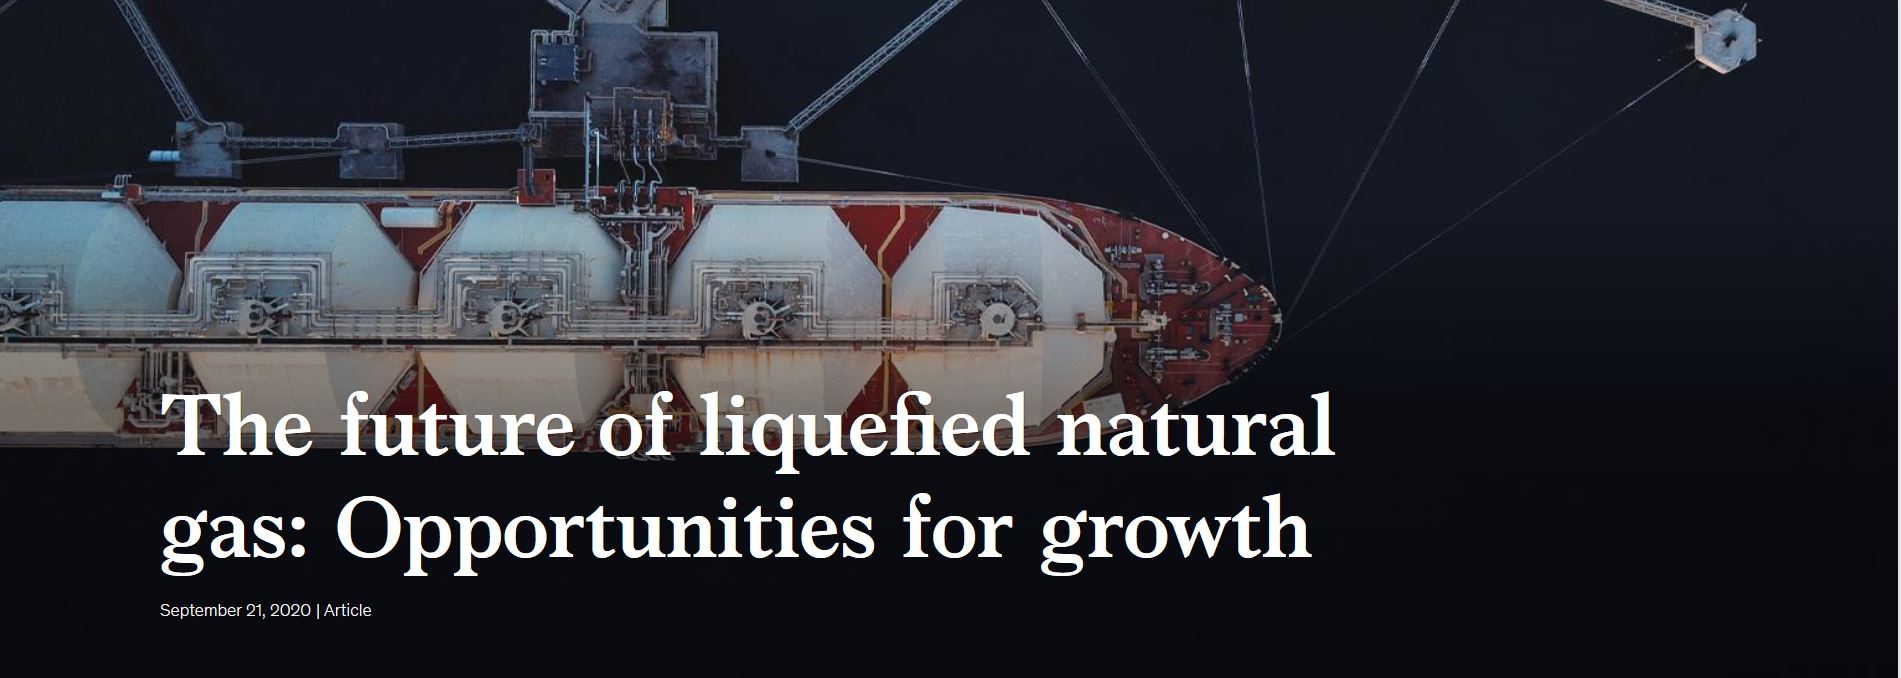 The future of liquefied natural gas: Opportunities for growth